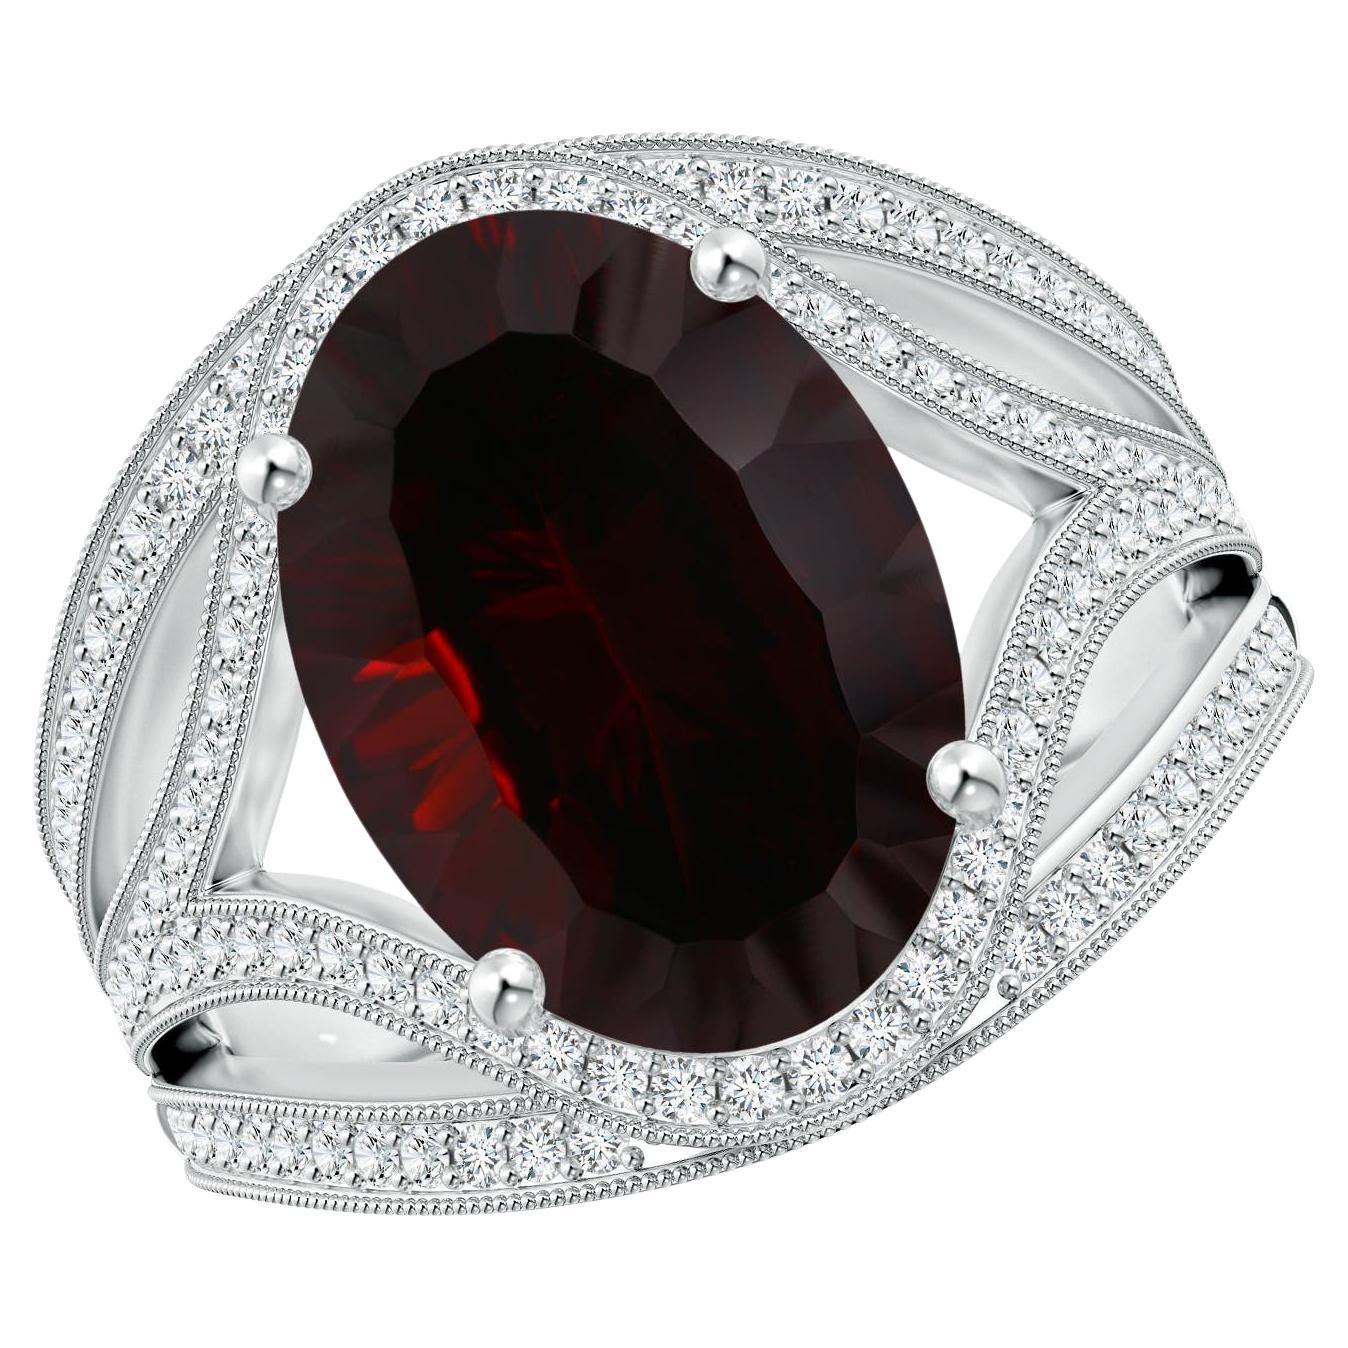 For Sale:  ANGARA GIA Certified Natural Garnet Ornate Shank Cocktail Ring in White Gold